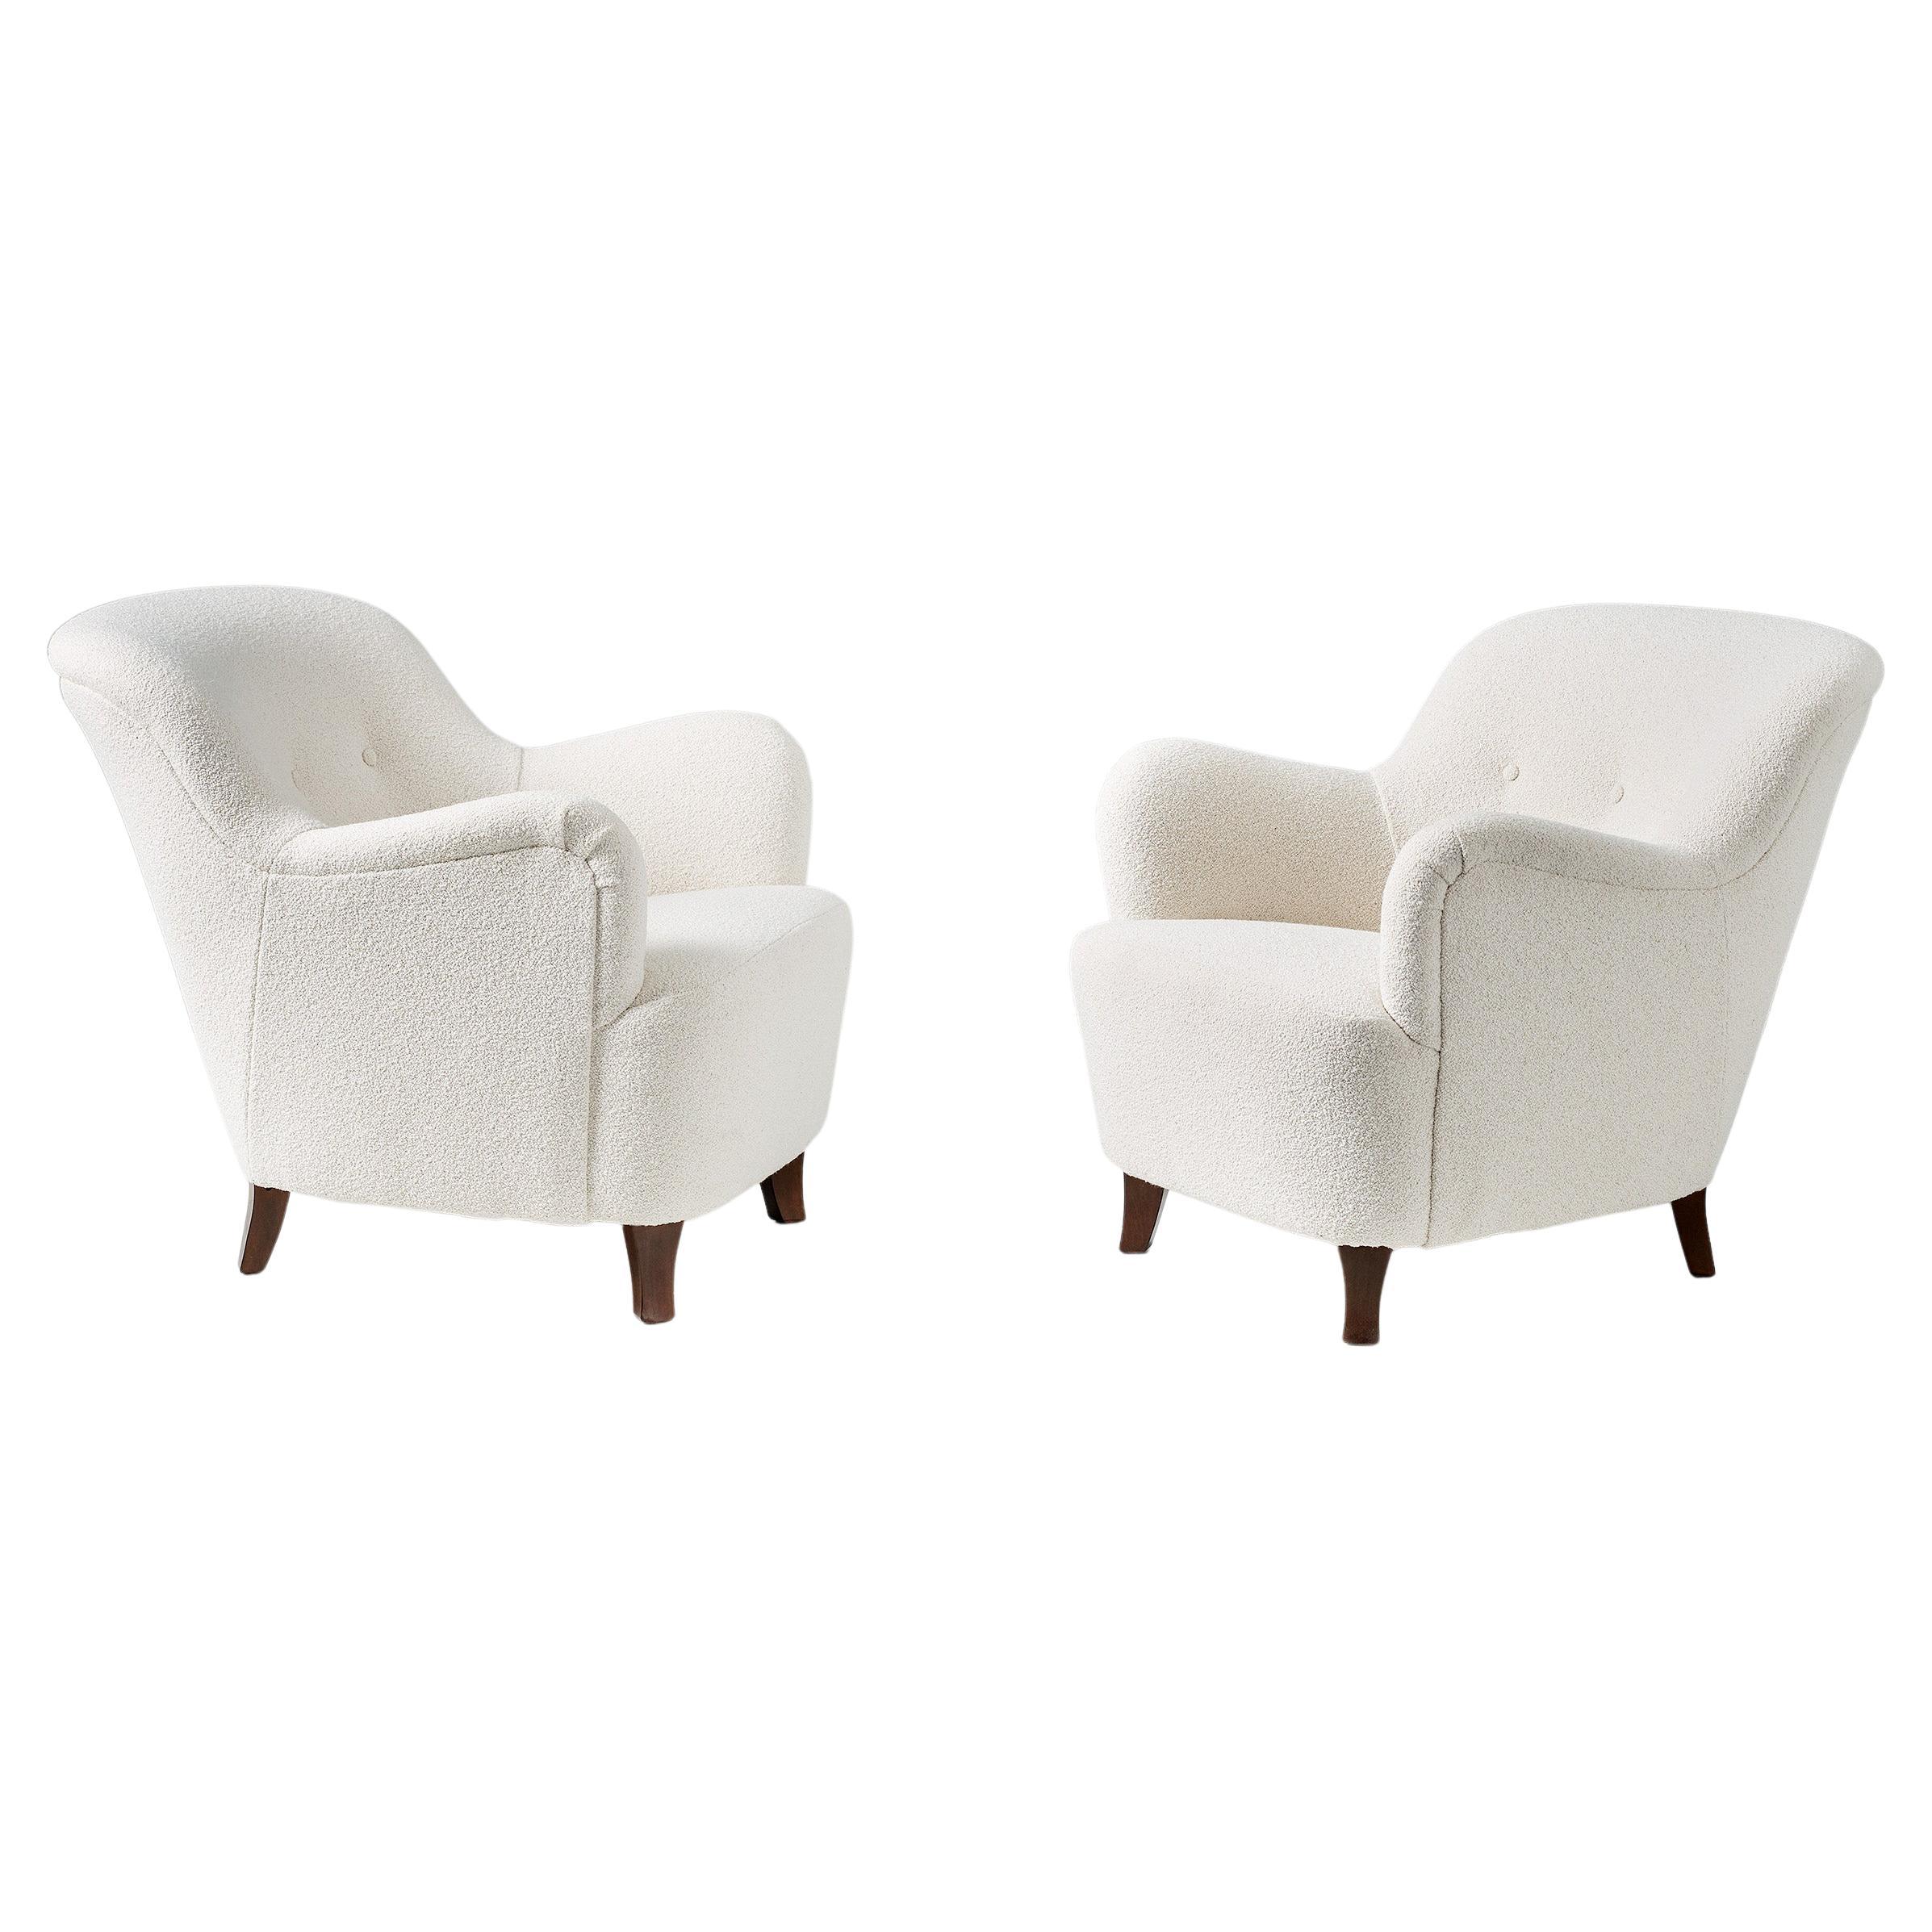 Pair of Custom Made White Boucle Lounge Chairs